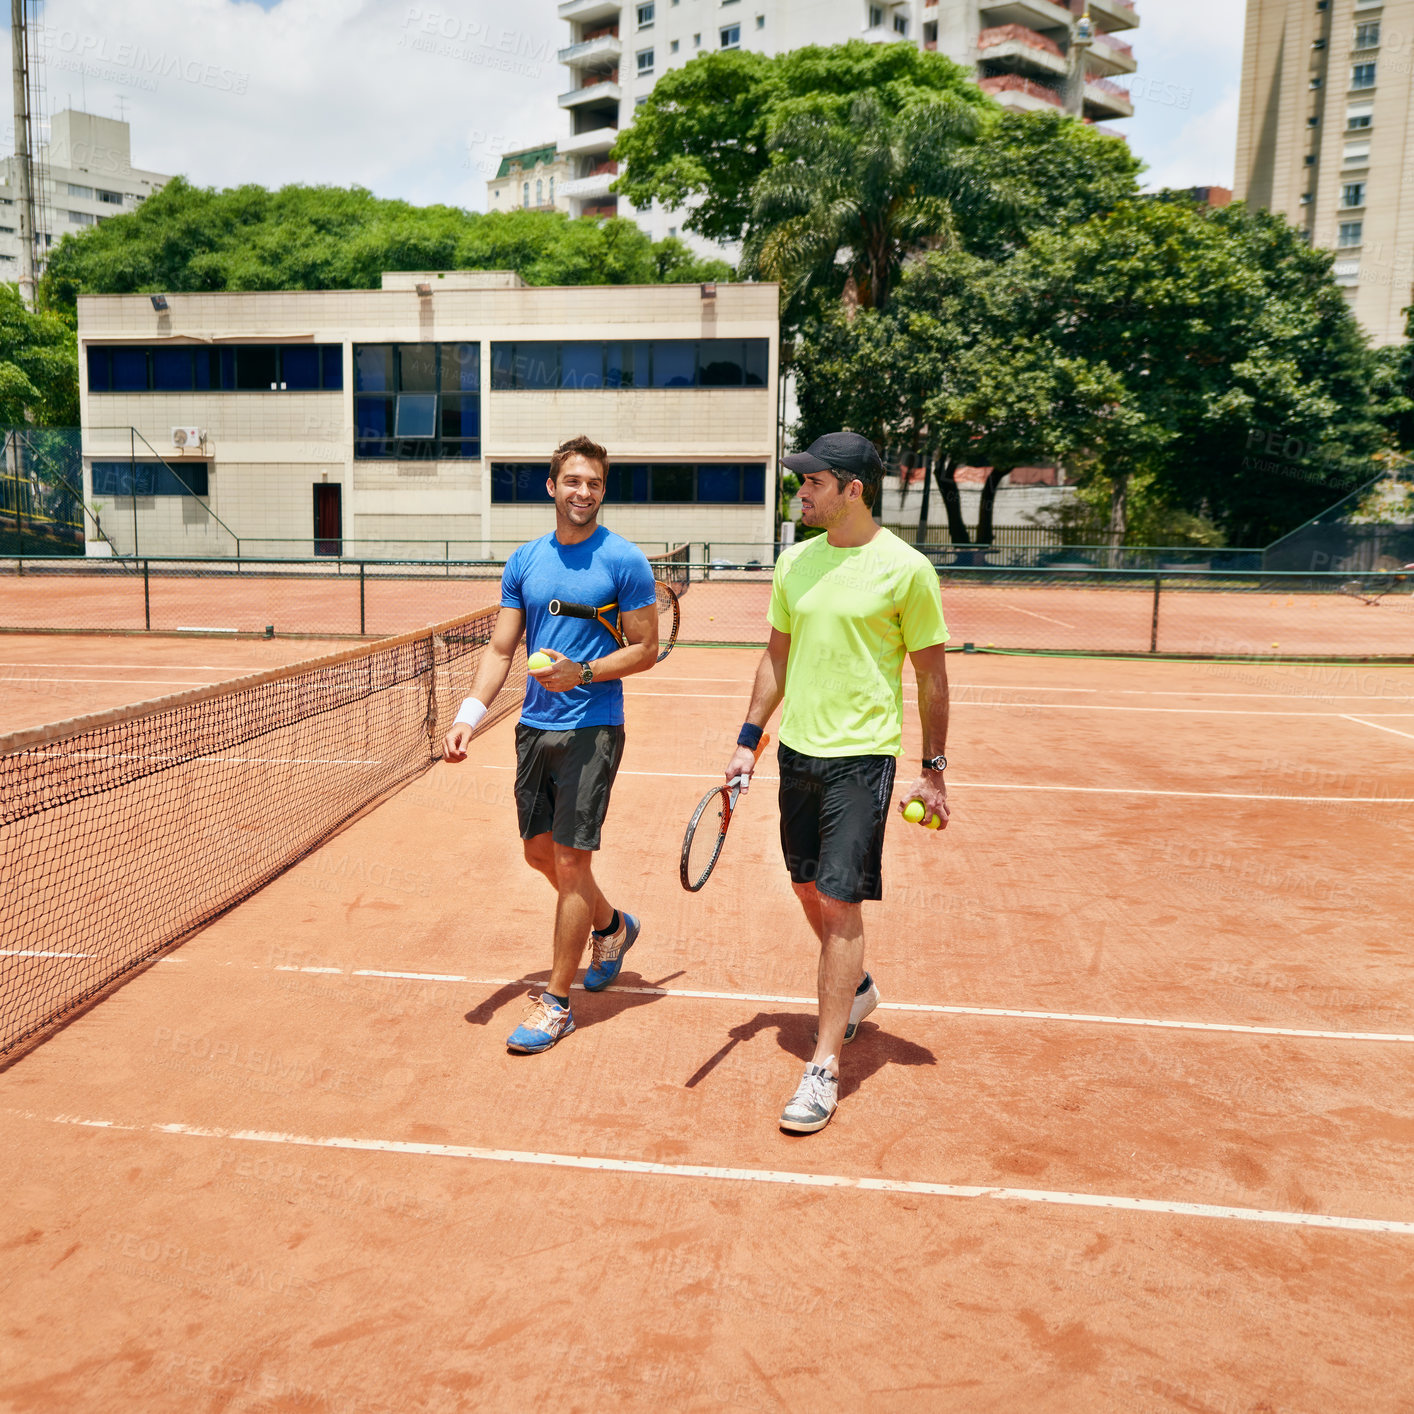 Buy stock photo Shot of  two tennis players talking on the court
